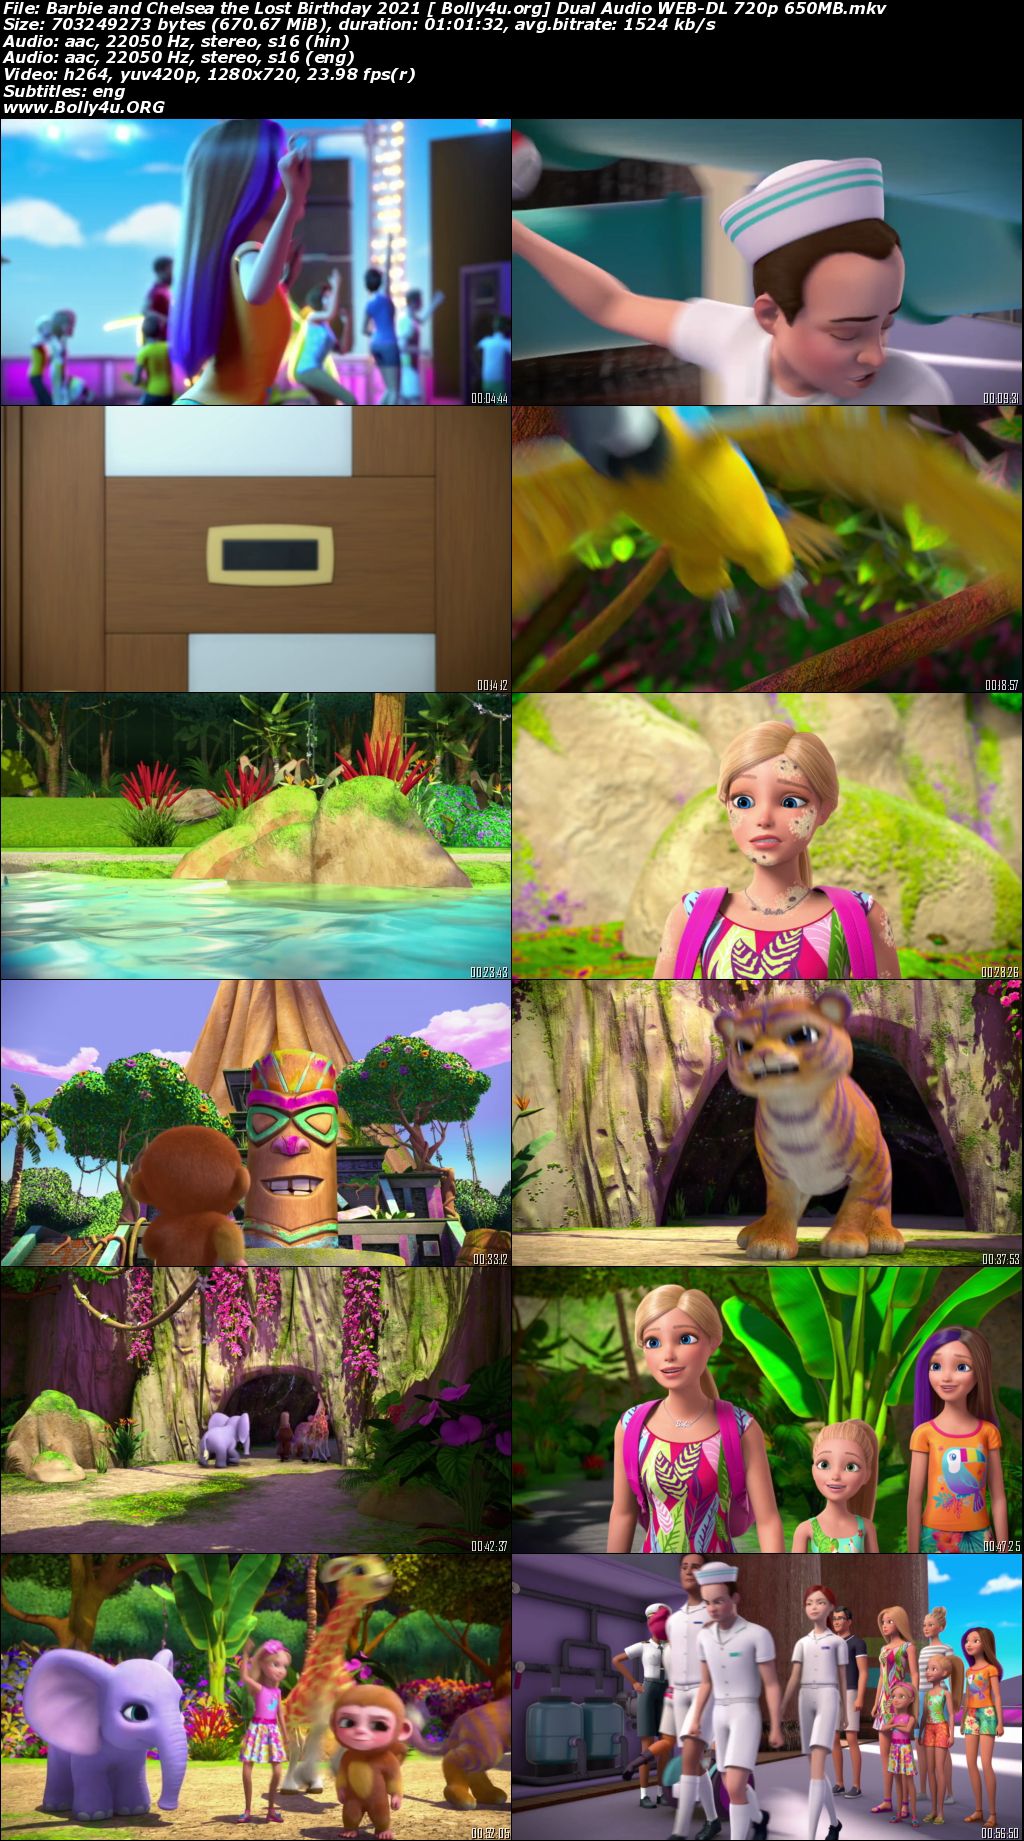 Barbie and Chelsea the Lost Birthday 2021 WEB-DL 200MB Hindi Dual Audio 480p Download